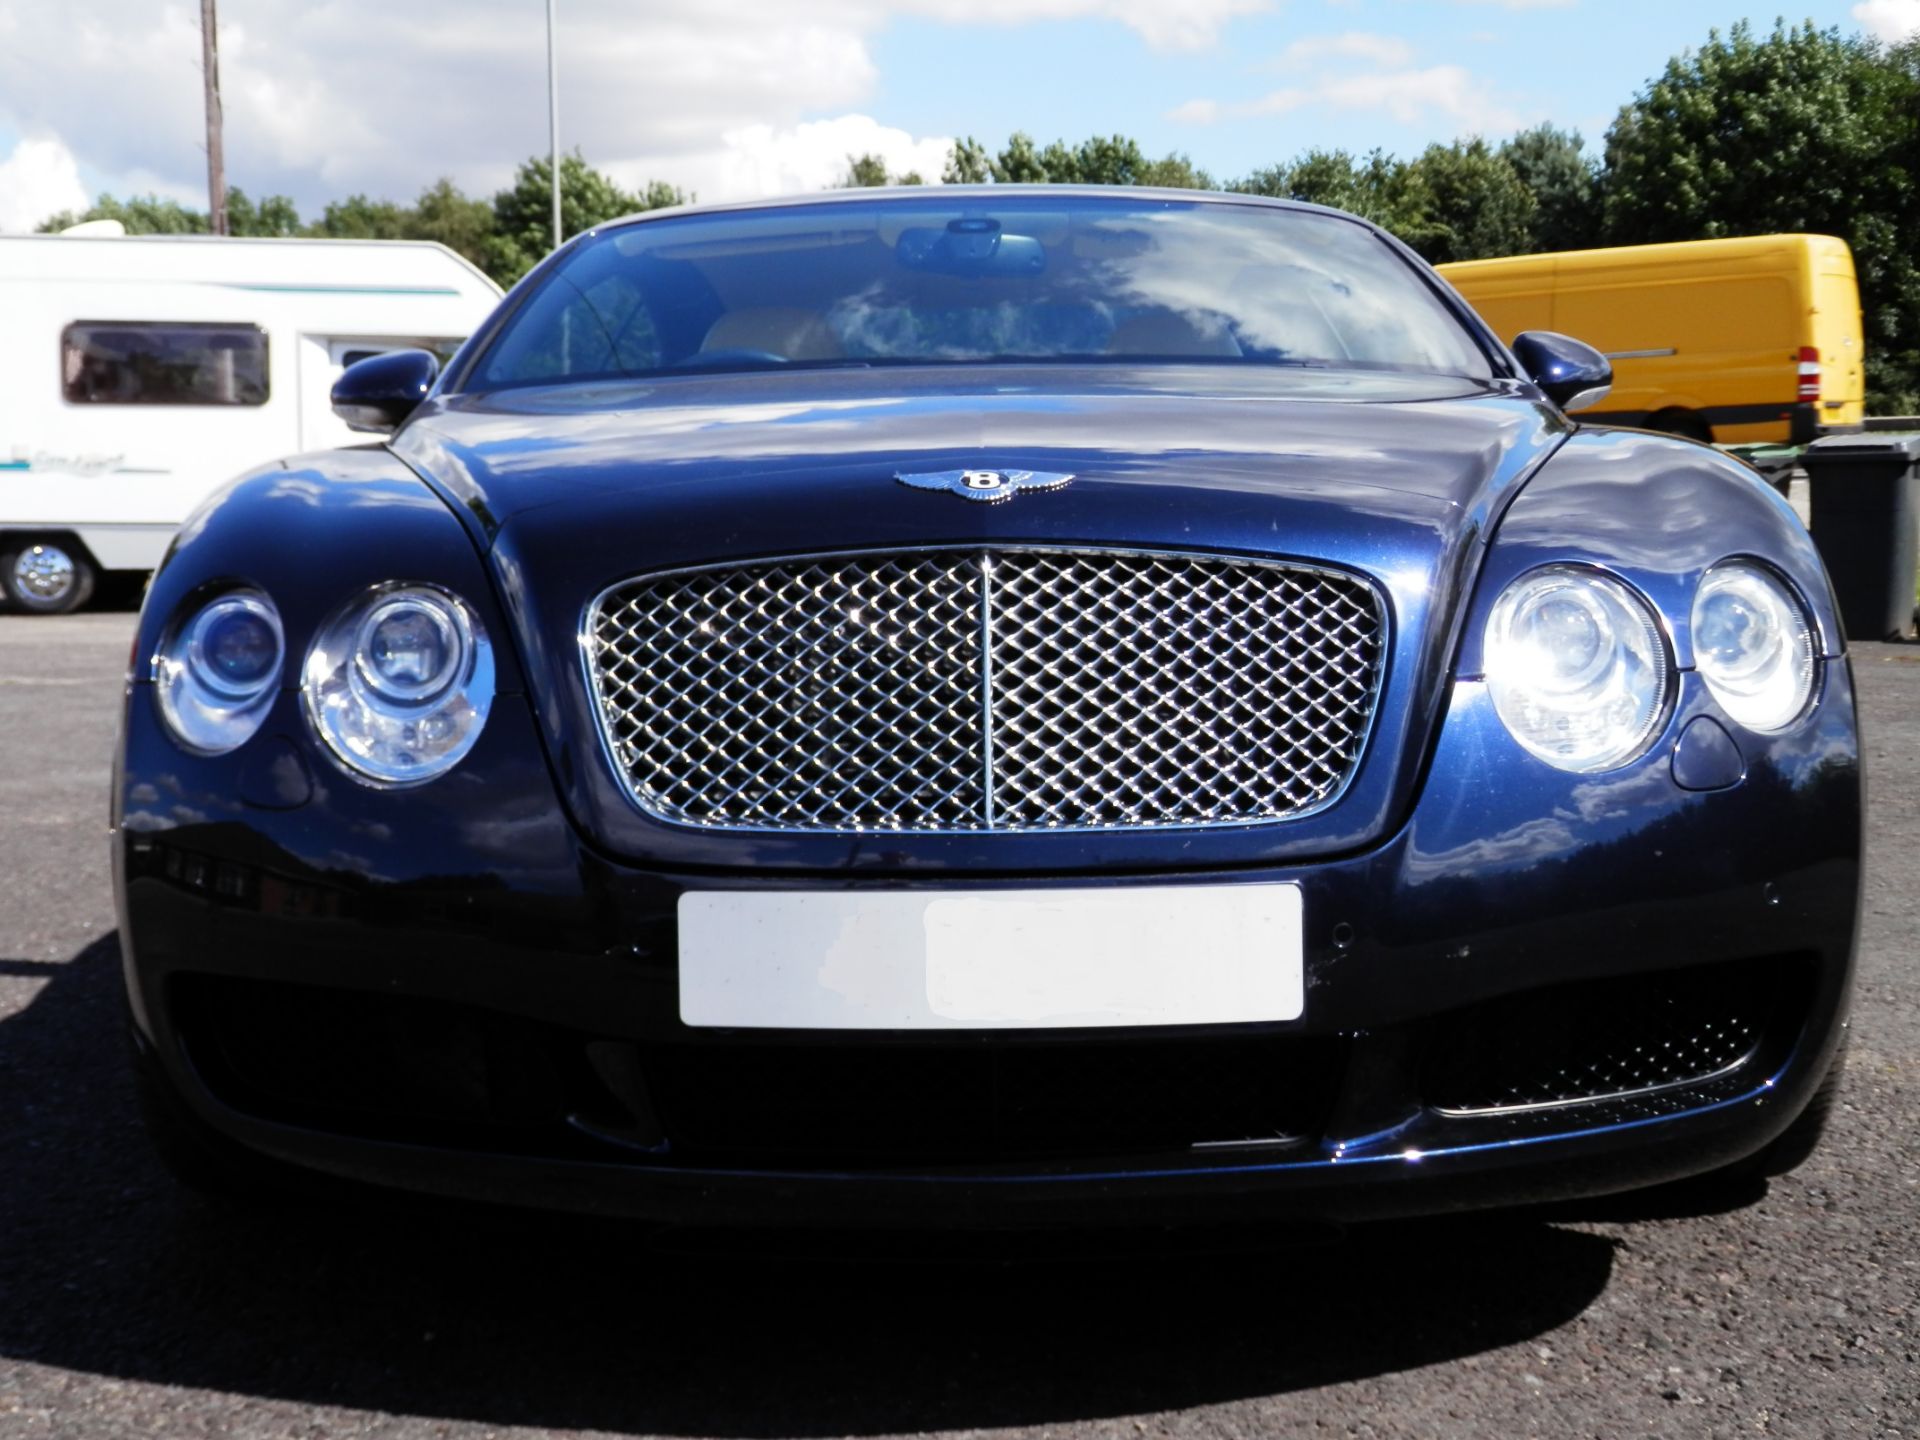 STUNNING 2007 BENTLEY GT CONTINENTAL, 6.0L TWIN TURBO,35K MILES, BLUE, CREAM LEATHER, FULL HISTORY. - Image 2 of 53